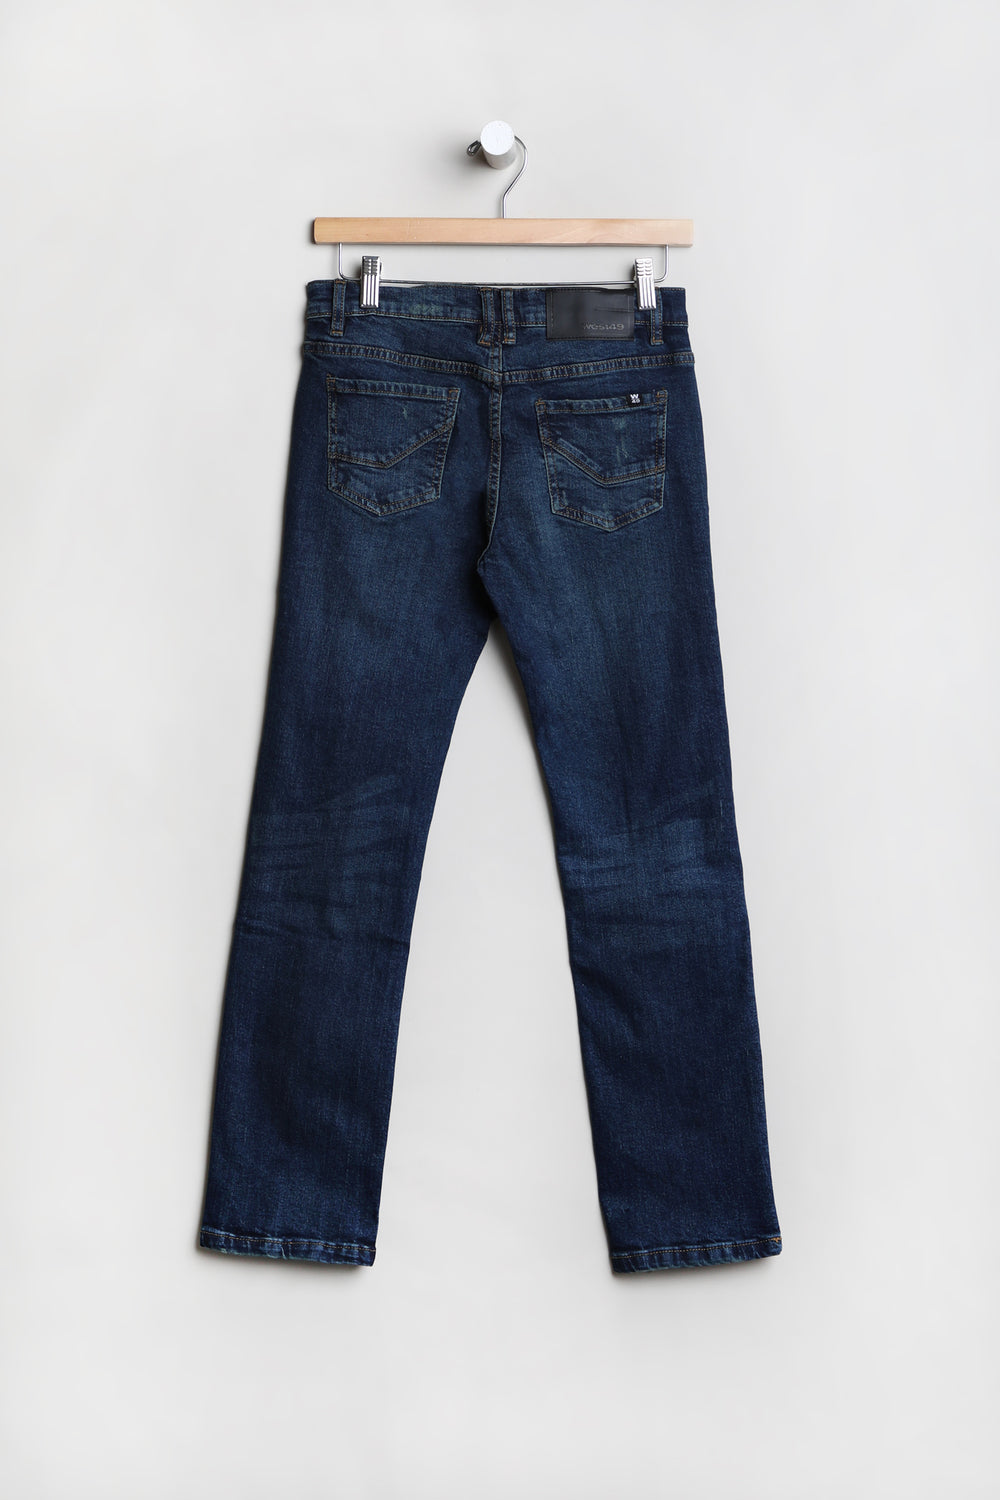 West49 Youth Distressed Slim Jeans West49 Youth Distressed Slim Jeans